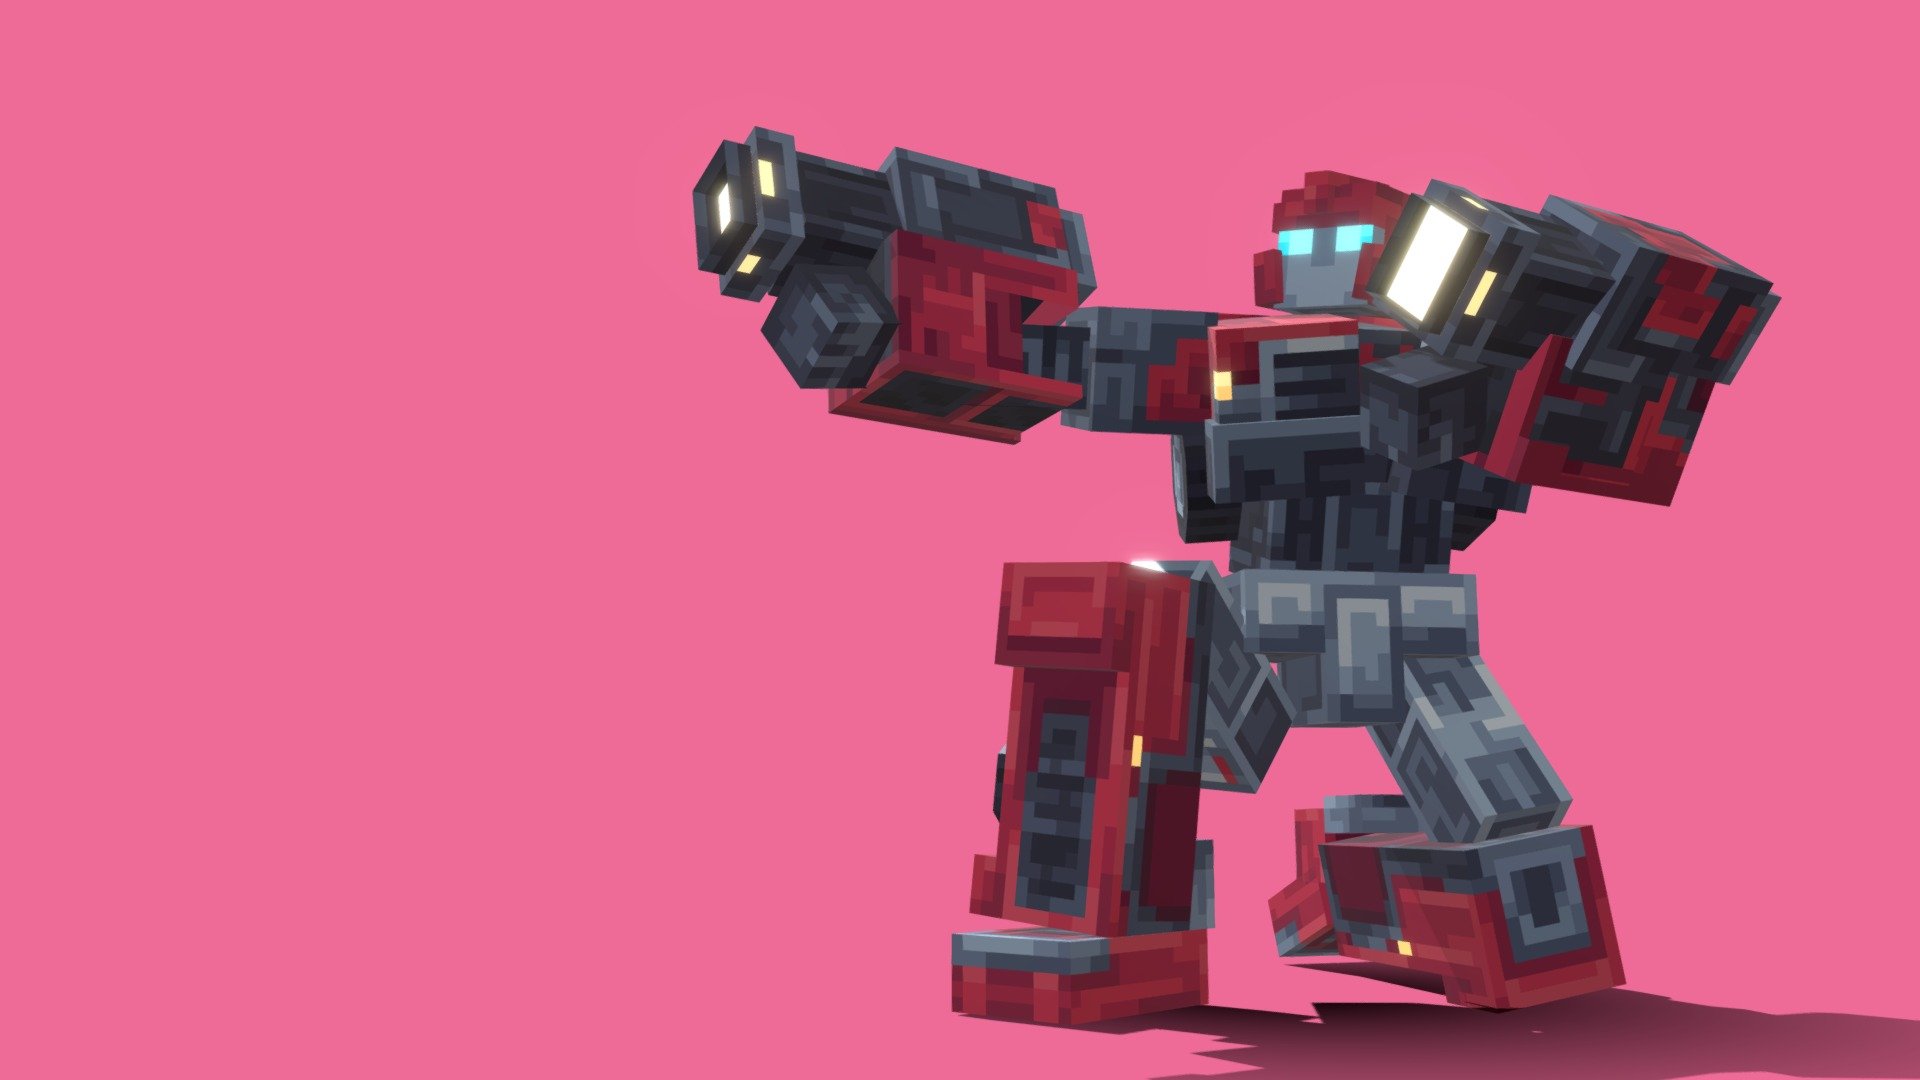 Transformers Ironhide recreated in blockbench - Ironhide - 3D model by Natzival 3d model